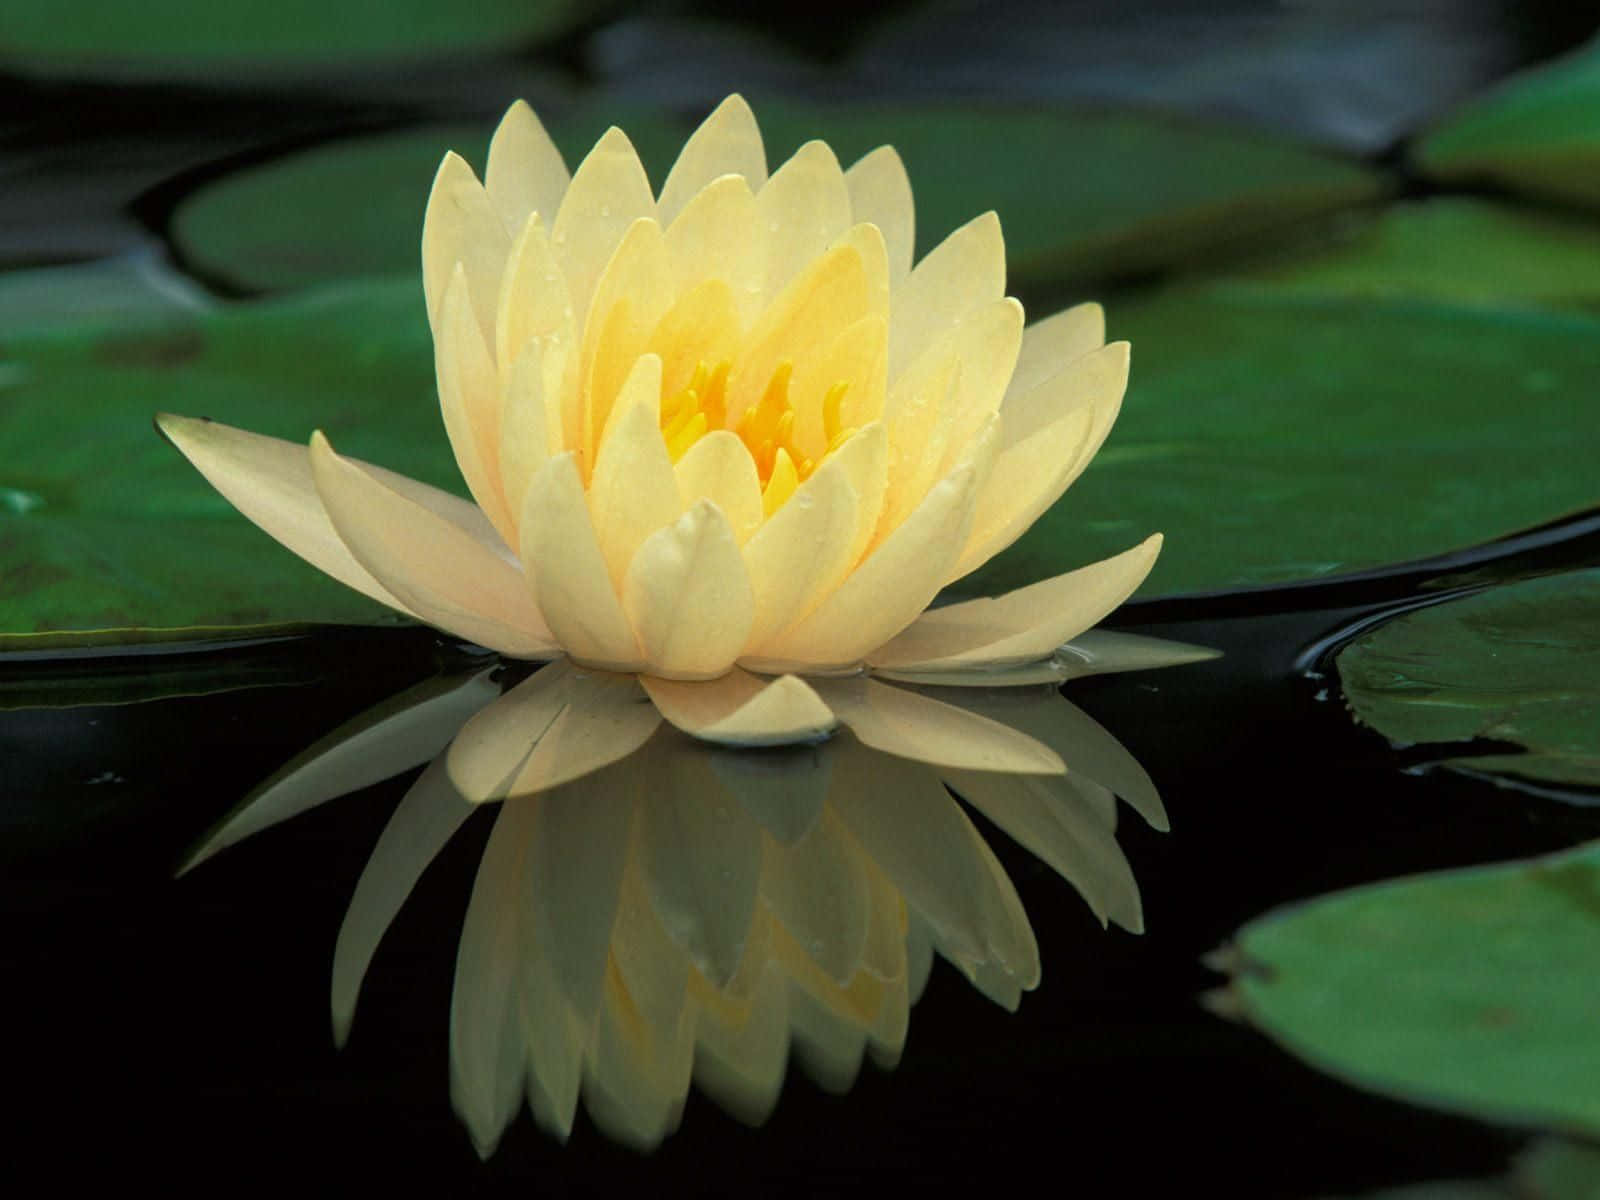 A serene lotus reflecting in the clear water